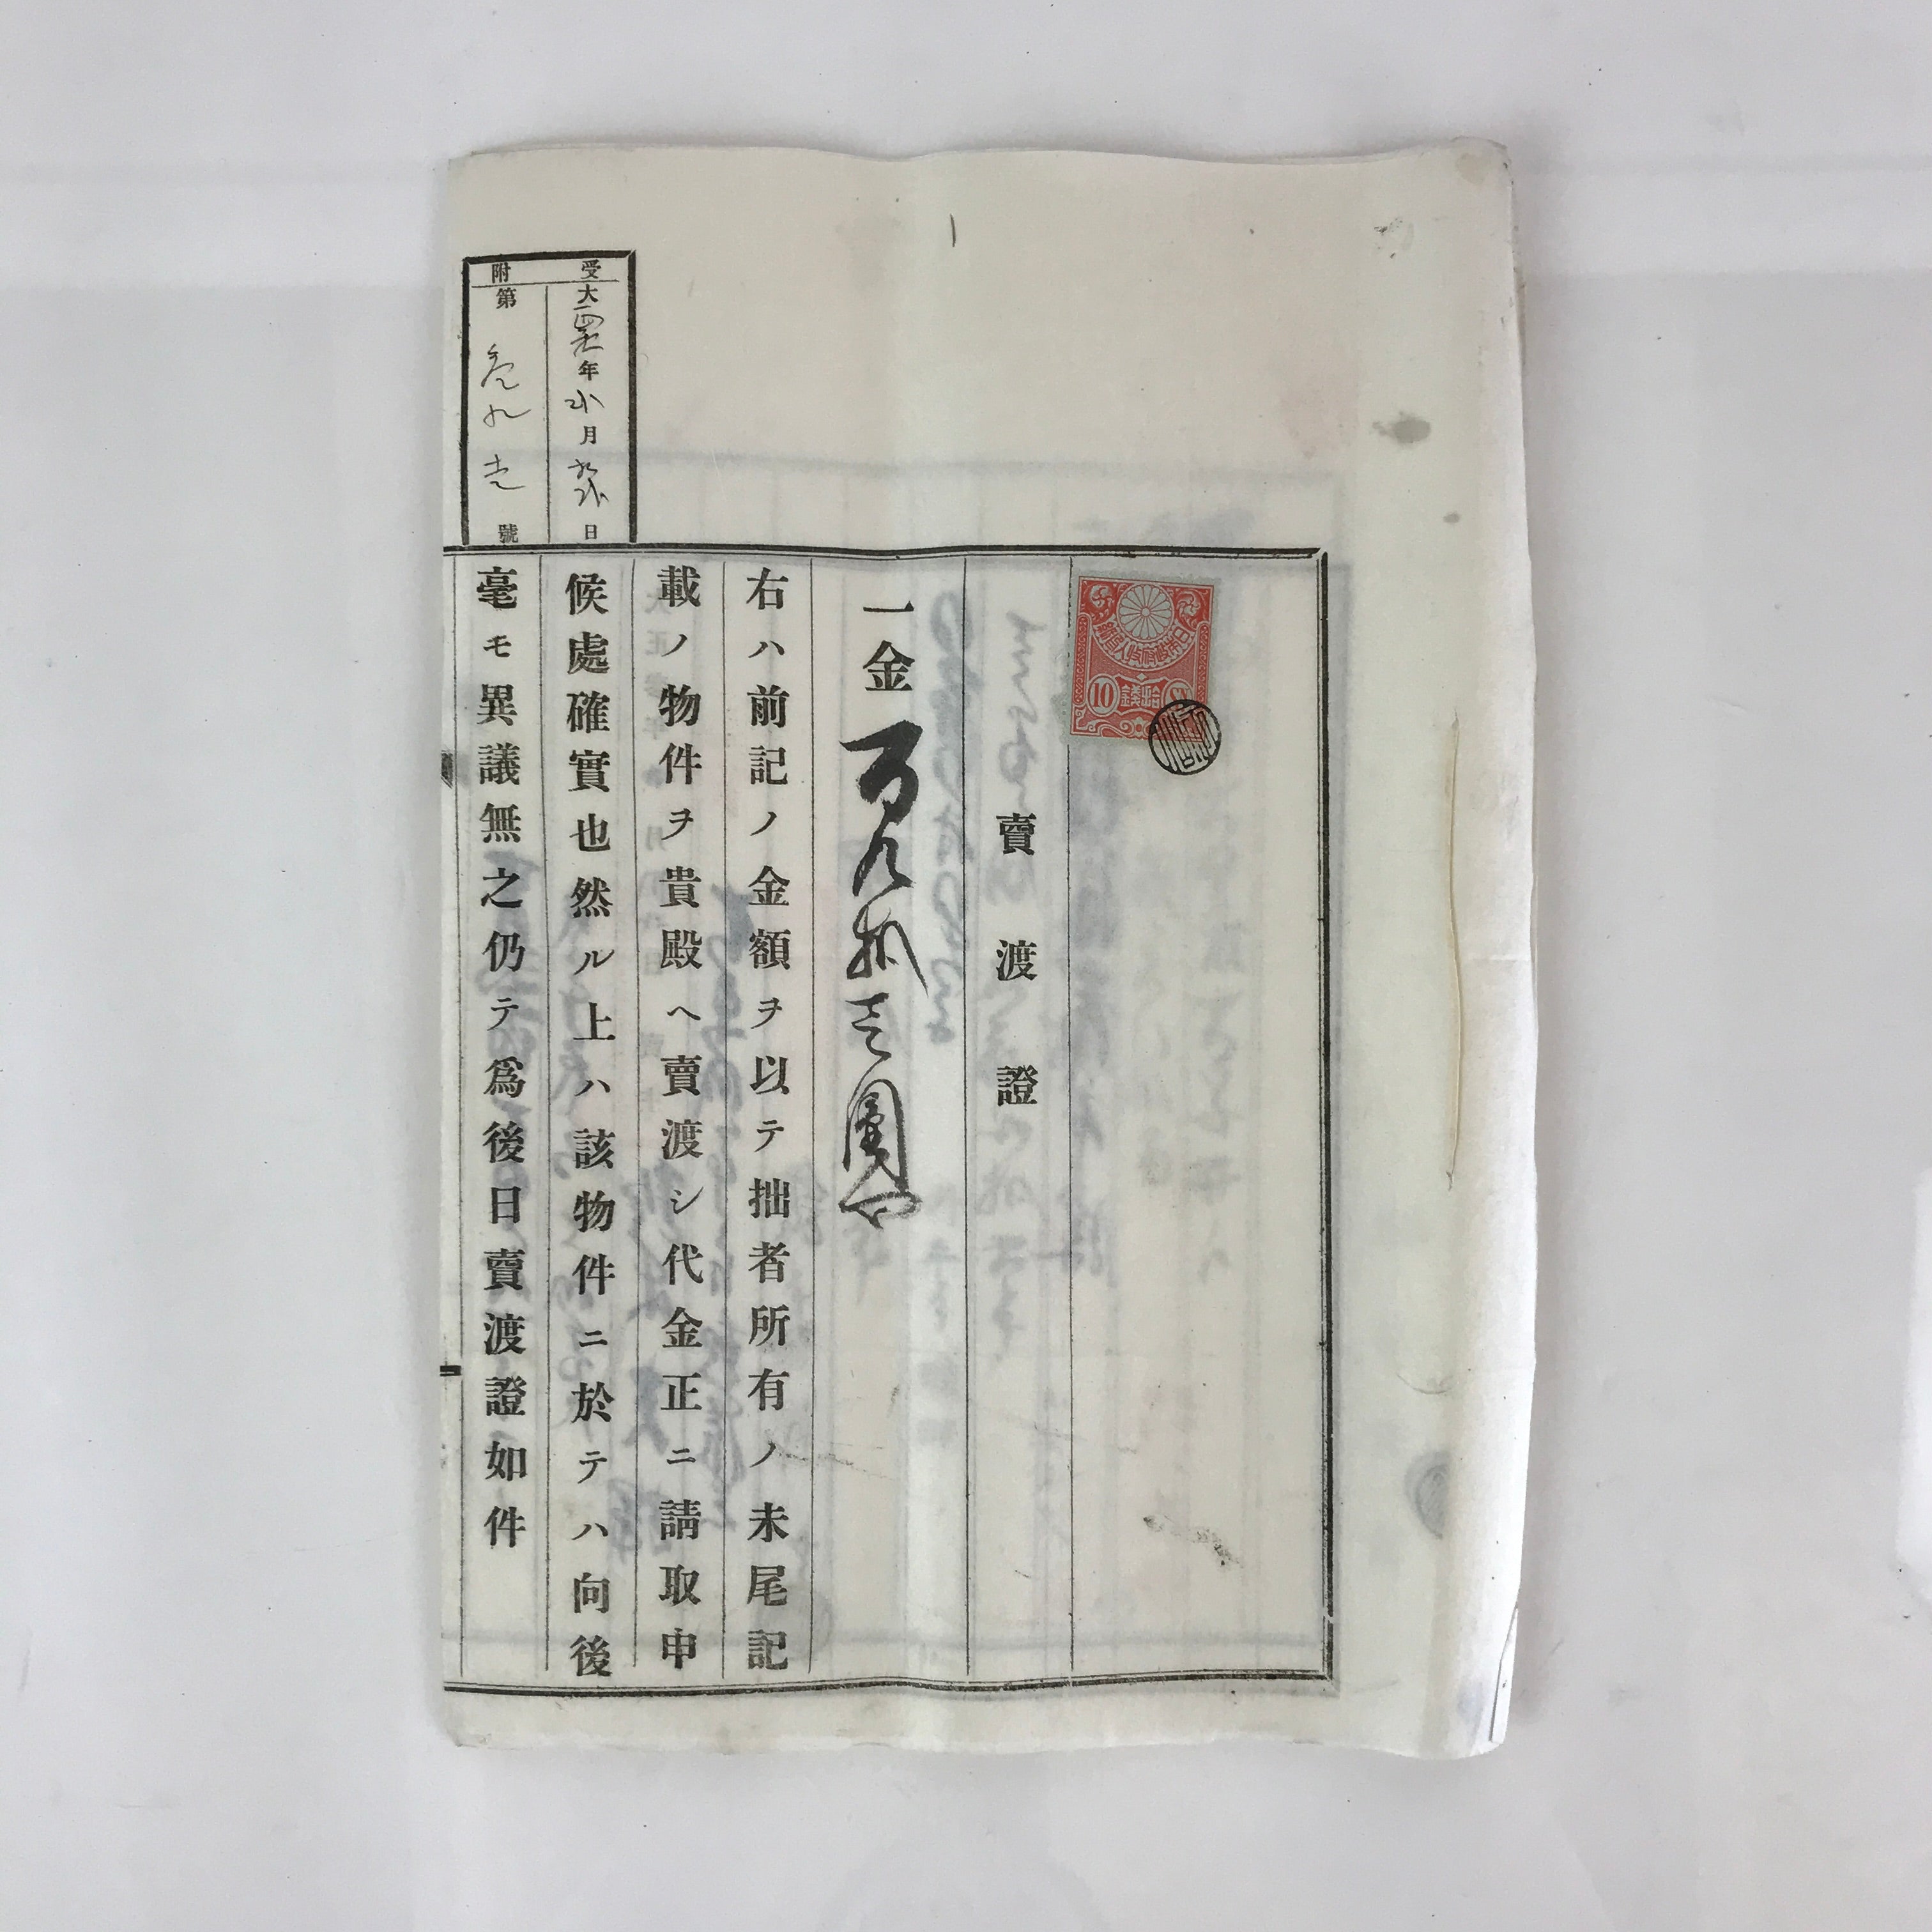 Antique C1914 Japanese House Purchase Certificate Taisho Period Paper P310